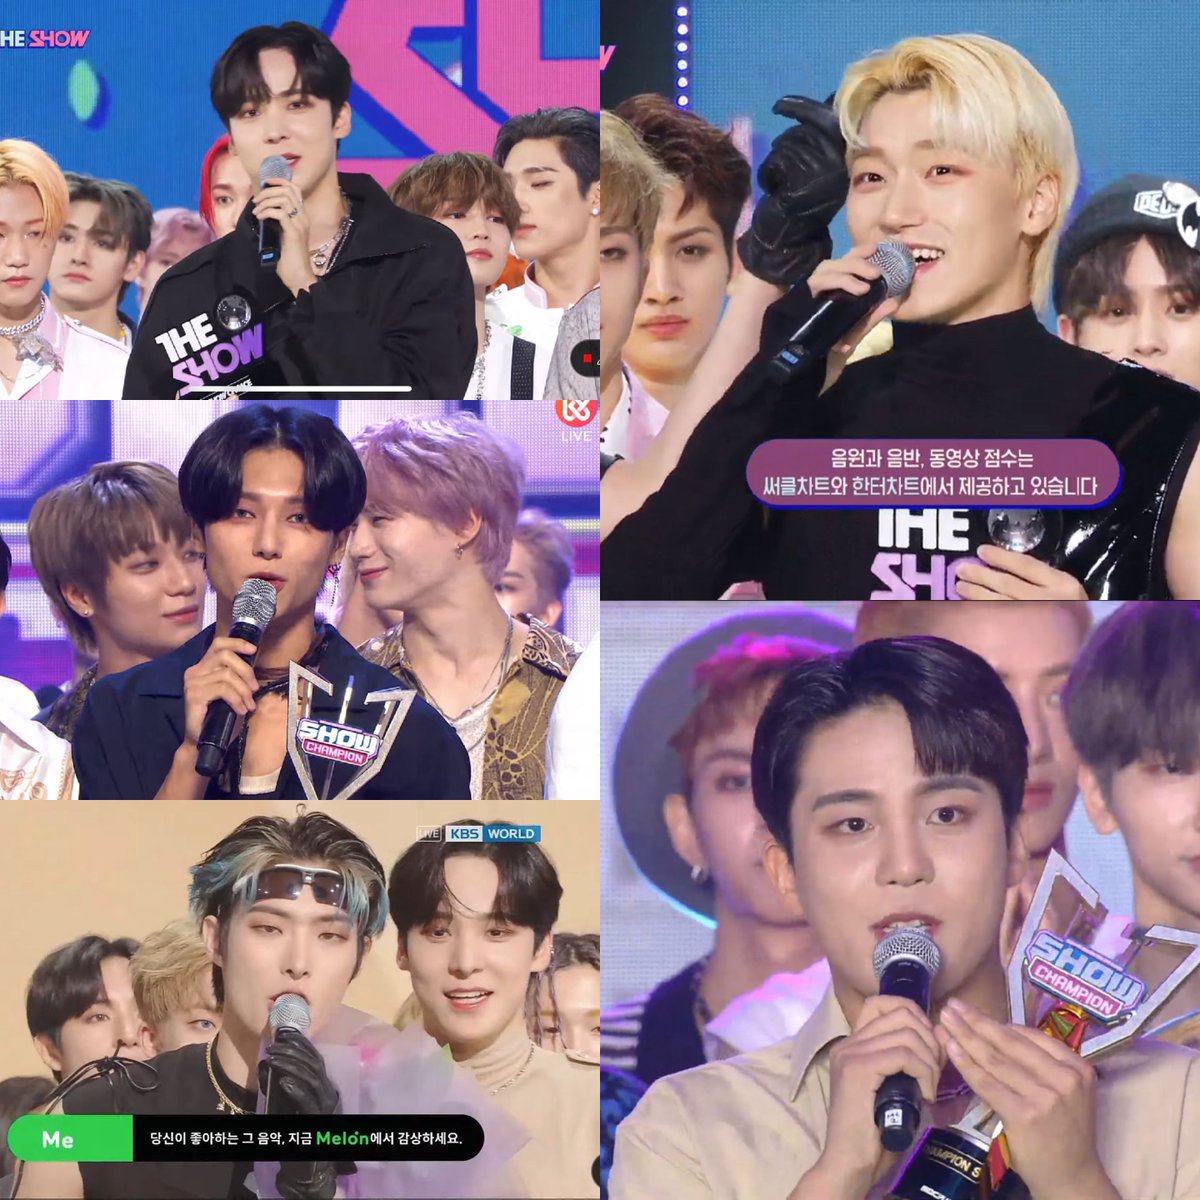 The acceptance speakers with trophy 😭

#Guerrilla5thWin
#ATEEZ10thWin
@ATEEZofficial #ATEEZ #에이티즈